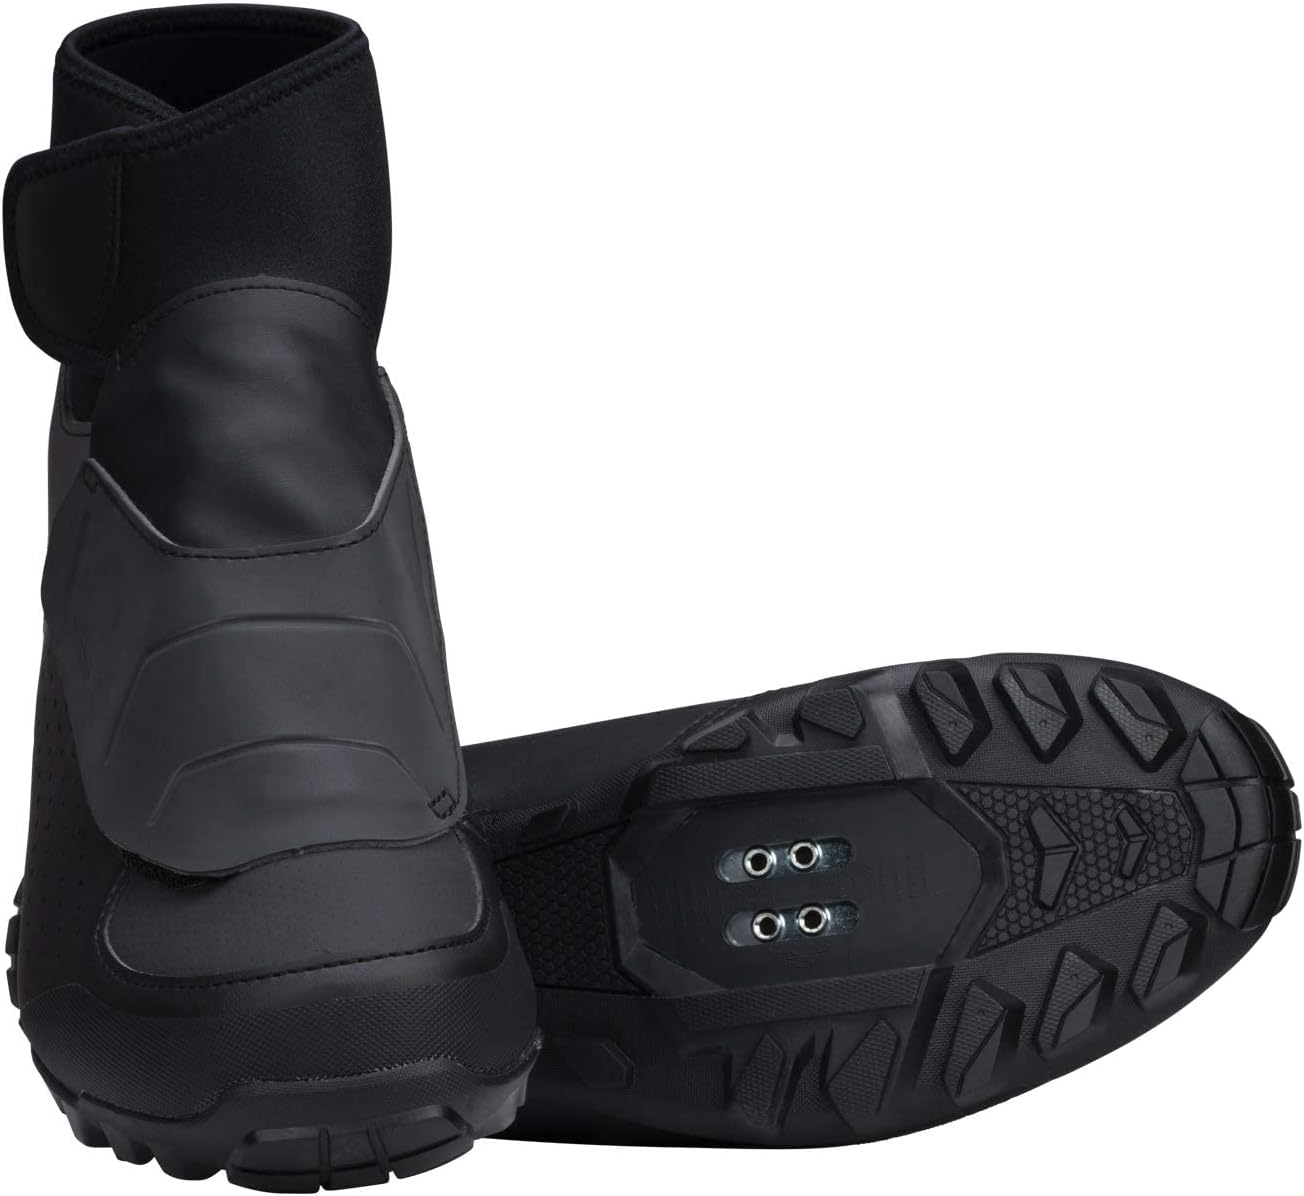 SHIMANO SH-MW501 Affordable SPD Shoe for The Cold and Wet